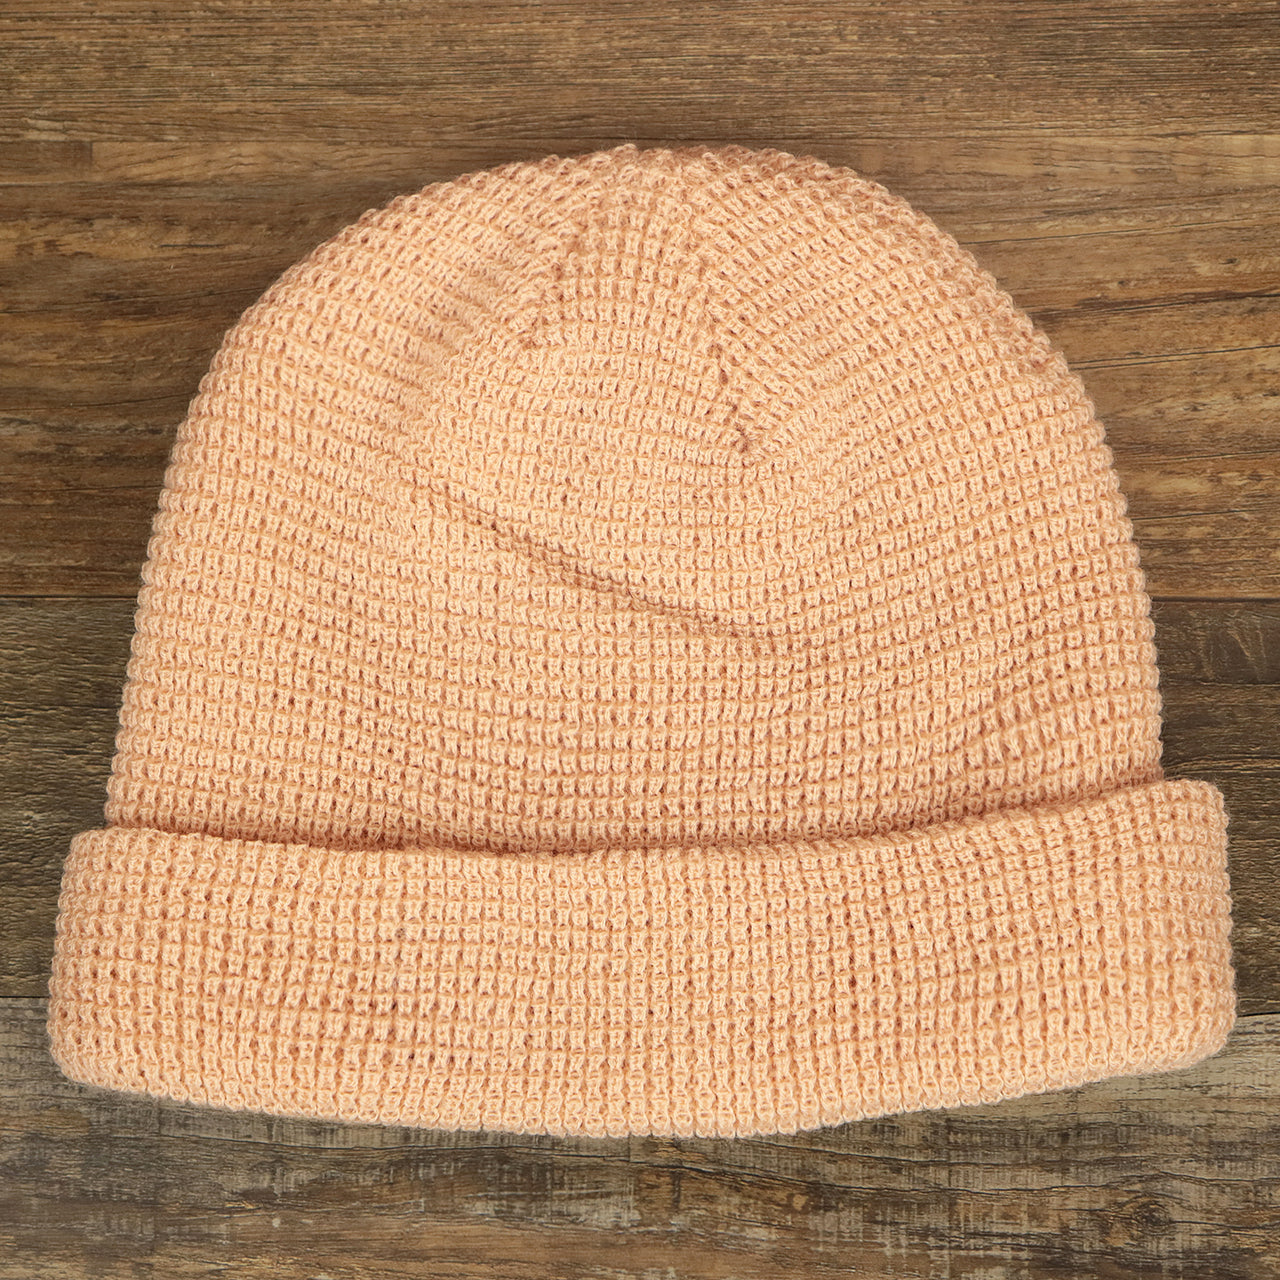 The front of the Dusty Pink Fisherman Knit Cuffed Beanie